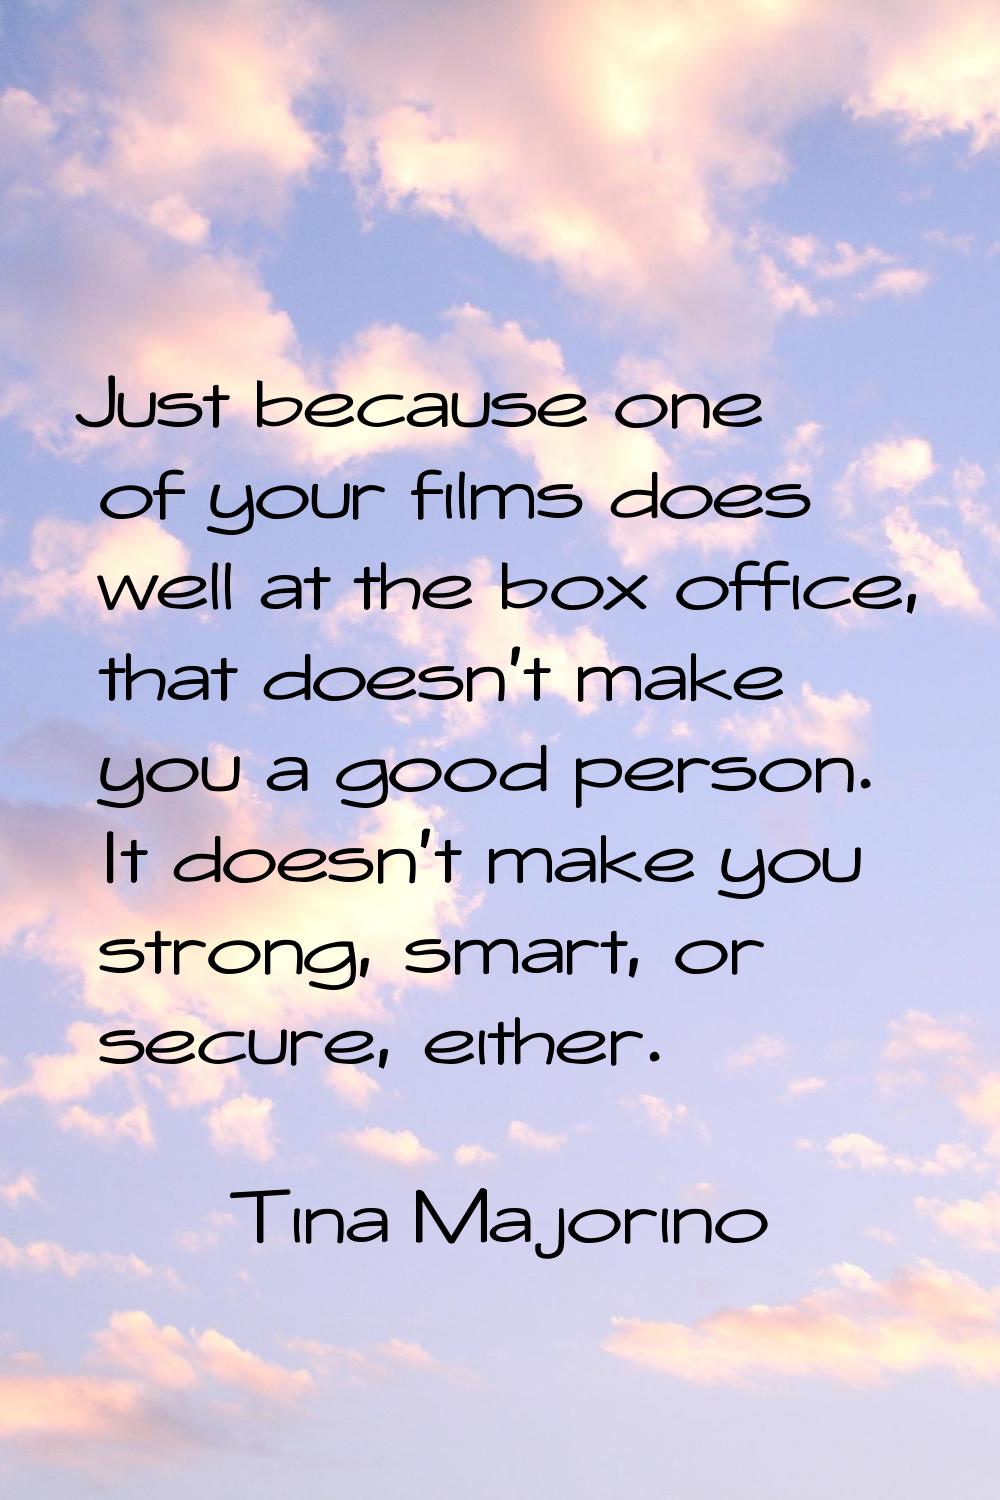 Just because one of your films does well at the box office, that doesn't make you a good person. It